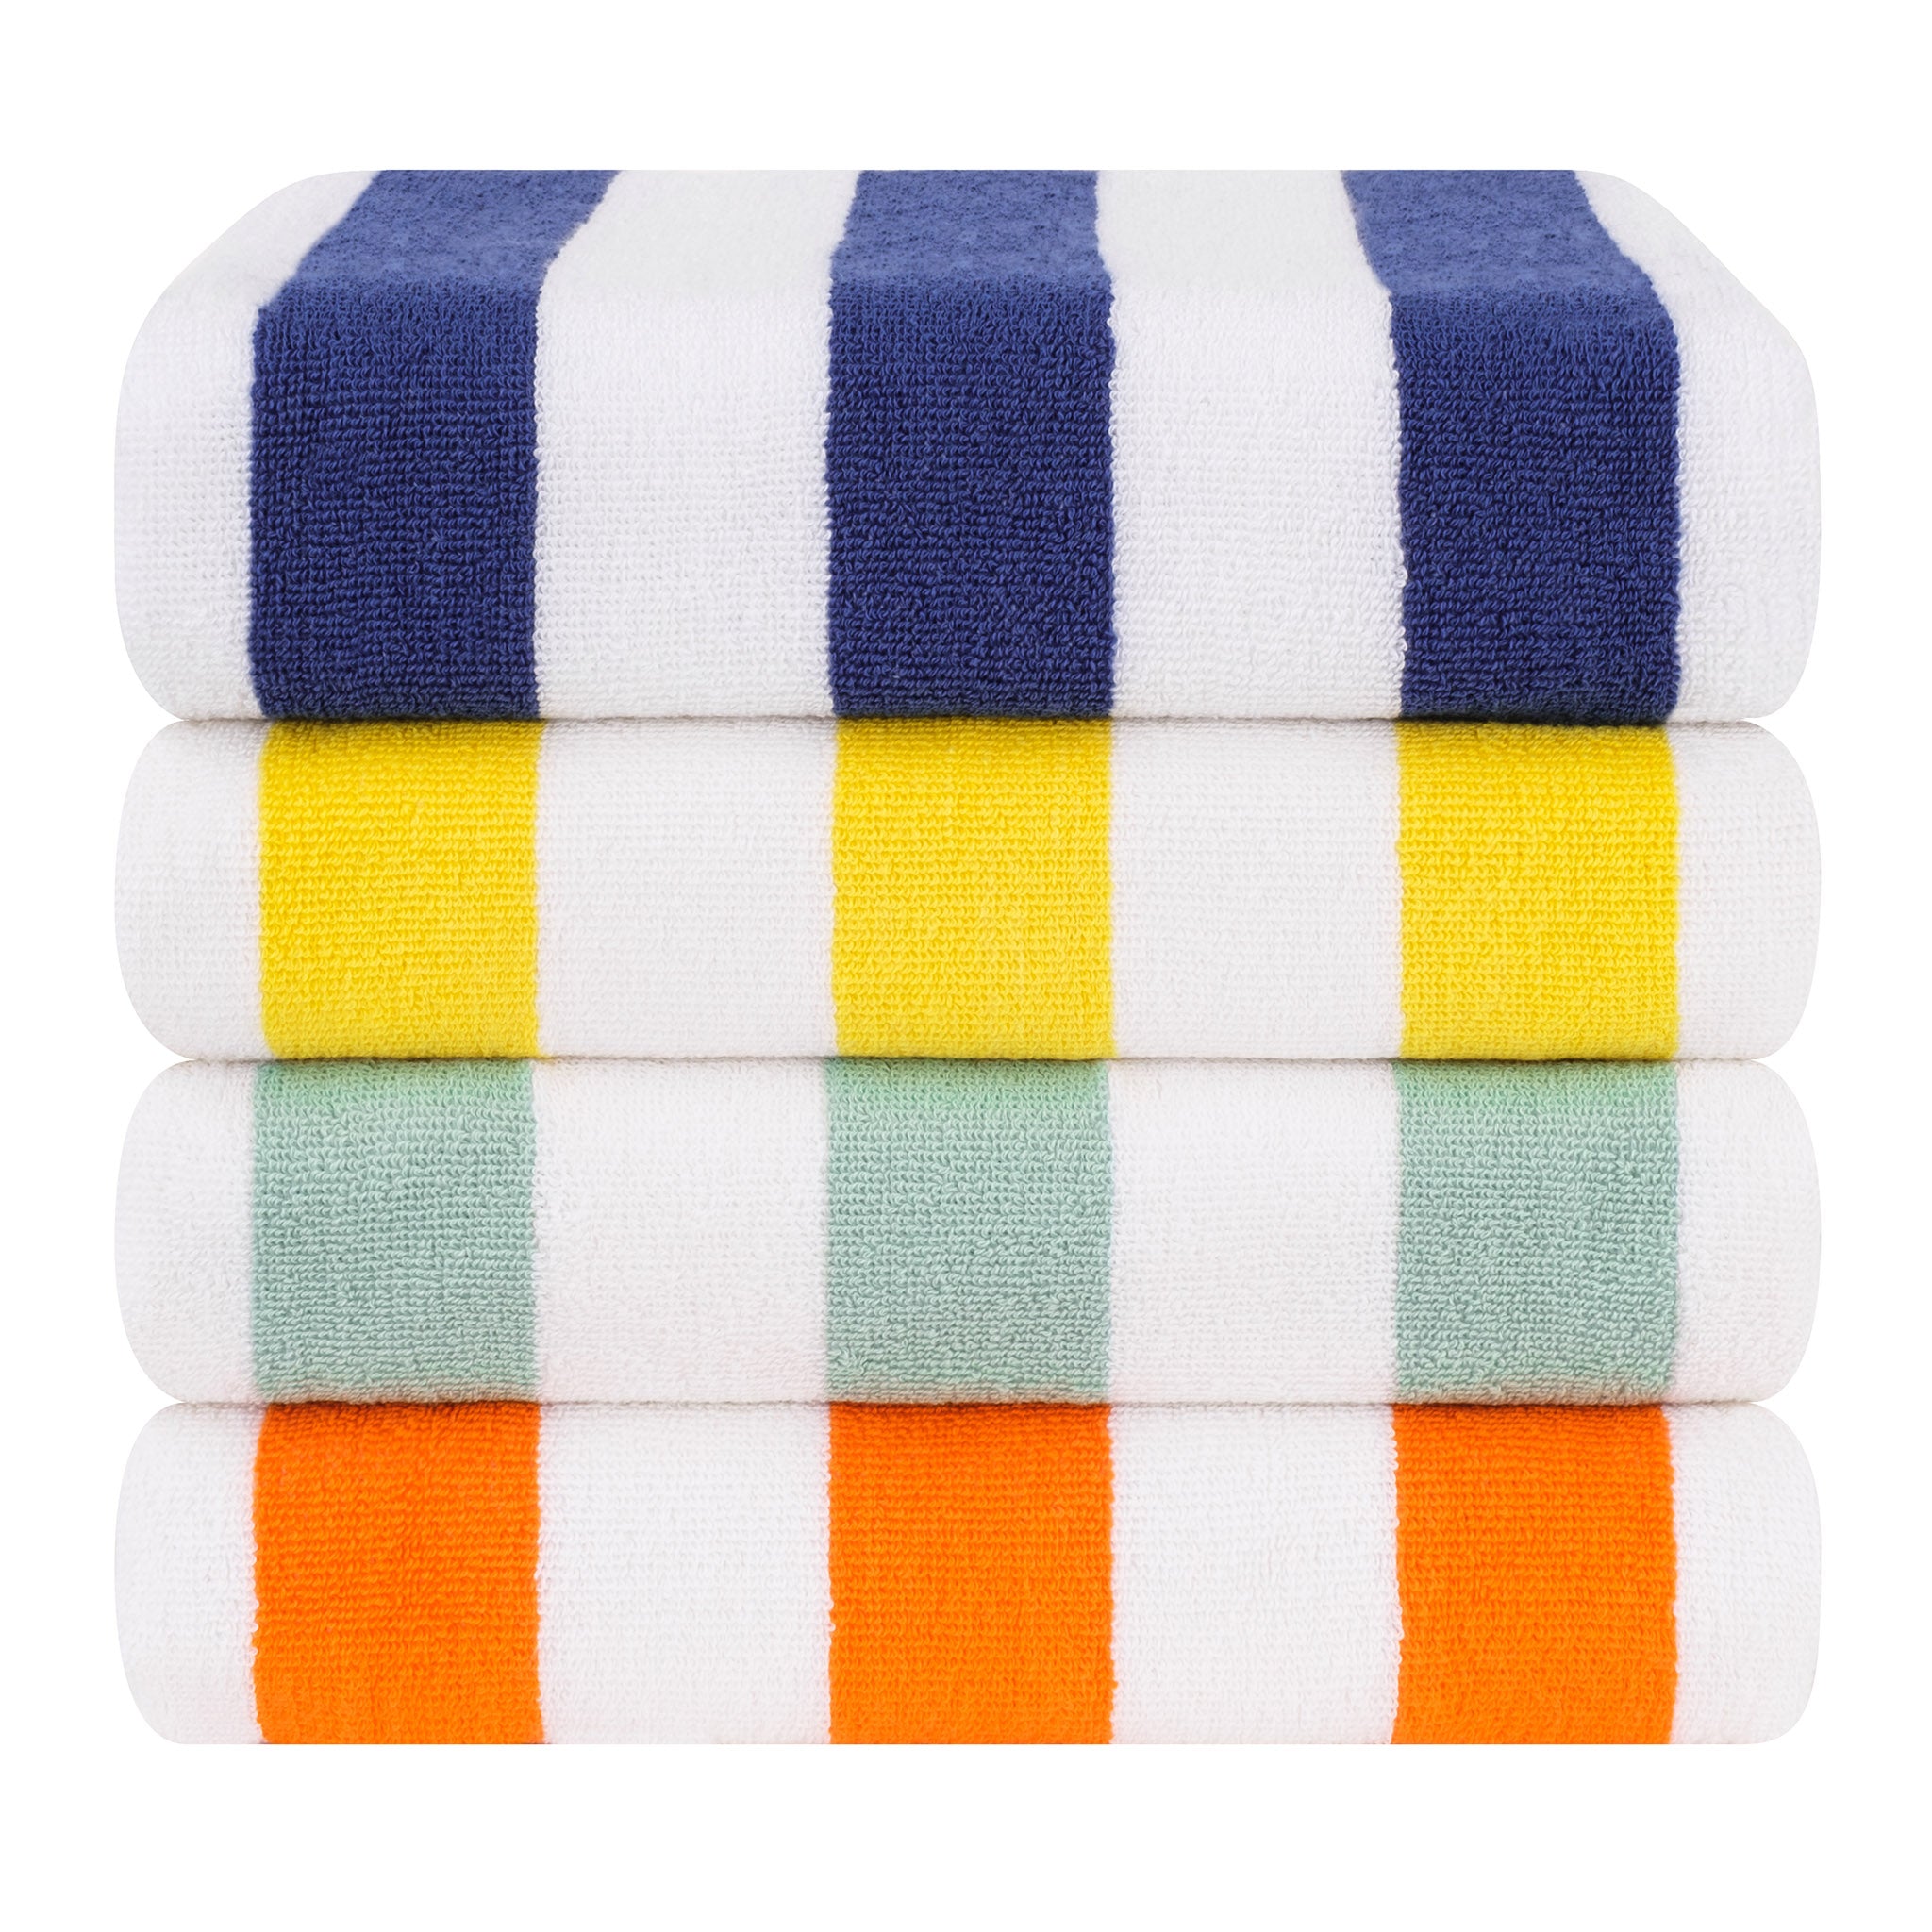 American Soft Linen 100% Cotton 4 Pack Beach Towels Cabana Striped Pool Towels -mix-2